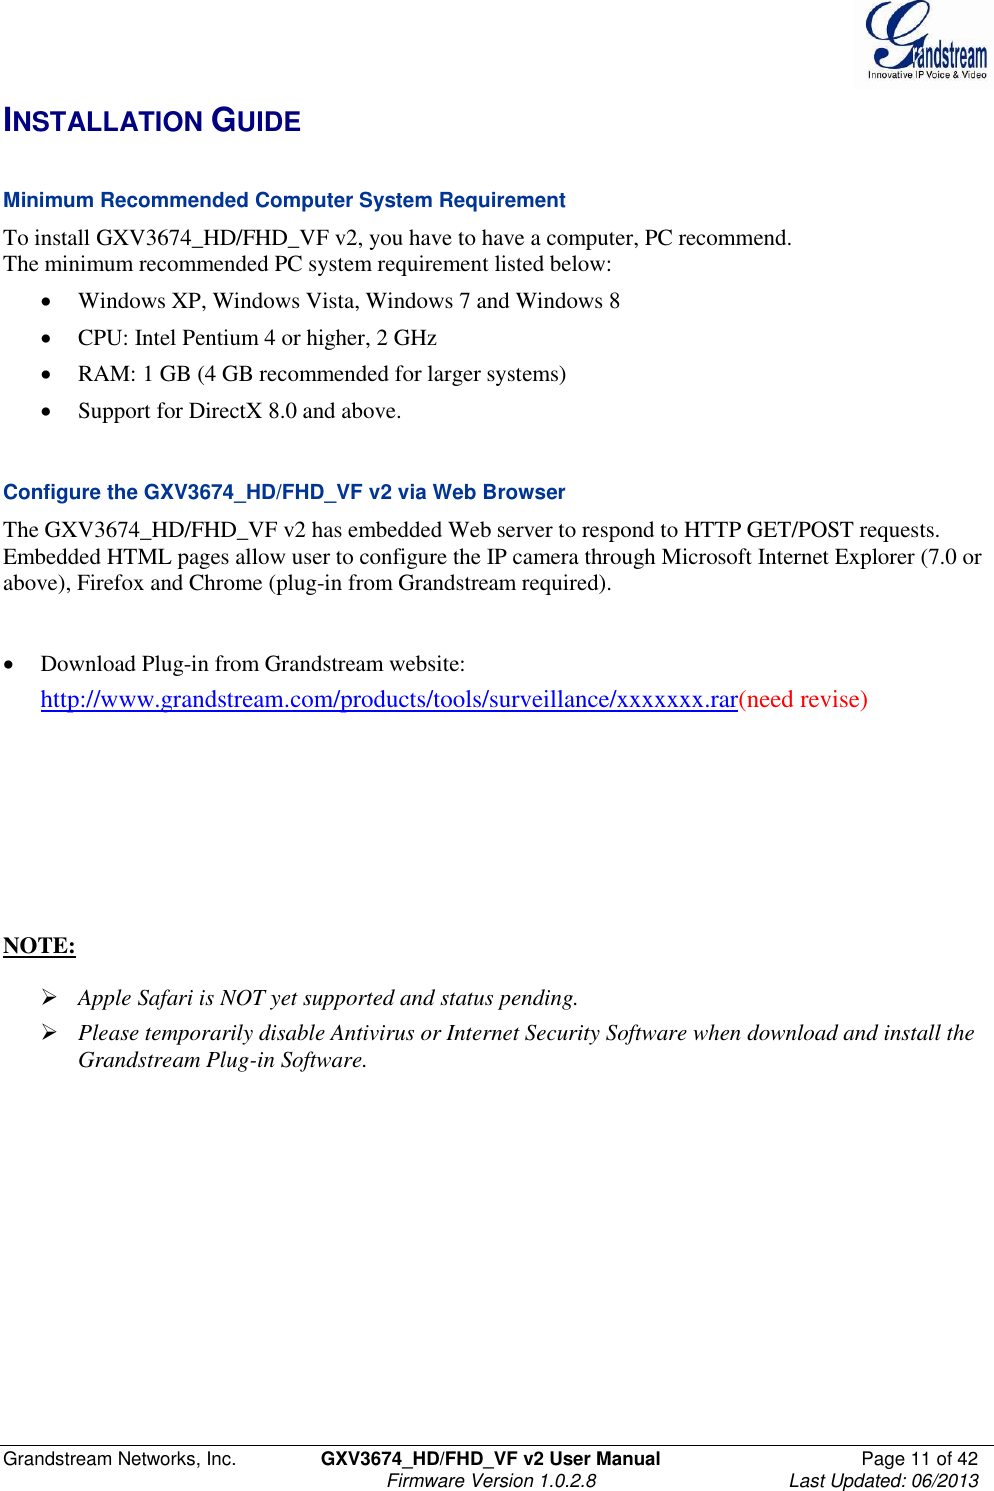  Grandstream Networks, Inc.  GXV3674_HD/FHD_VF v2 User Manual  Page 11 of 42   Firmware Version 1.0.2.8  Last Updated: 06/2013  INSTALLATION GUIDE  Minimum Recommended Computer System Requirement To install GXV3674_HD/FHD_VF v2, you have to have a computer, PC recommend.  The minimum recommended PC system requirement listed below:   Windows XP, Windows Vista, Windows 7 and Windows 8  CPU: Intel Pentium 4 or higher, 2 GHz  RAM: 1 GB (4 GB recommended for larger systems)  Support for DirectX 8.0 and above.    Configure the GXV3674_HD/FHD_VF v2 via Web Browser The GXV3674_HD/FHD_VF v2 has embedded Web server to respond to HTTP GET/POST requests. Embedded HTML pages allow user to configure the IP camera through Microsoft Internet Explorer (7.0 or above), Firefox and Chrome (plug-in from Grandstream required).     Download Plug-in from Grandstream website:  http://www.grandstream.com/products/tools/surveillance/xxxxxxx.rar(need revise)        NOTE:    Apple Safari is NOT yet supported and status pending.   Please temporarily disable Antivirus or Internet Security Software when download and install the Grandstream Plug-in Software.  